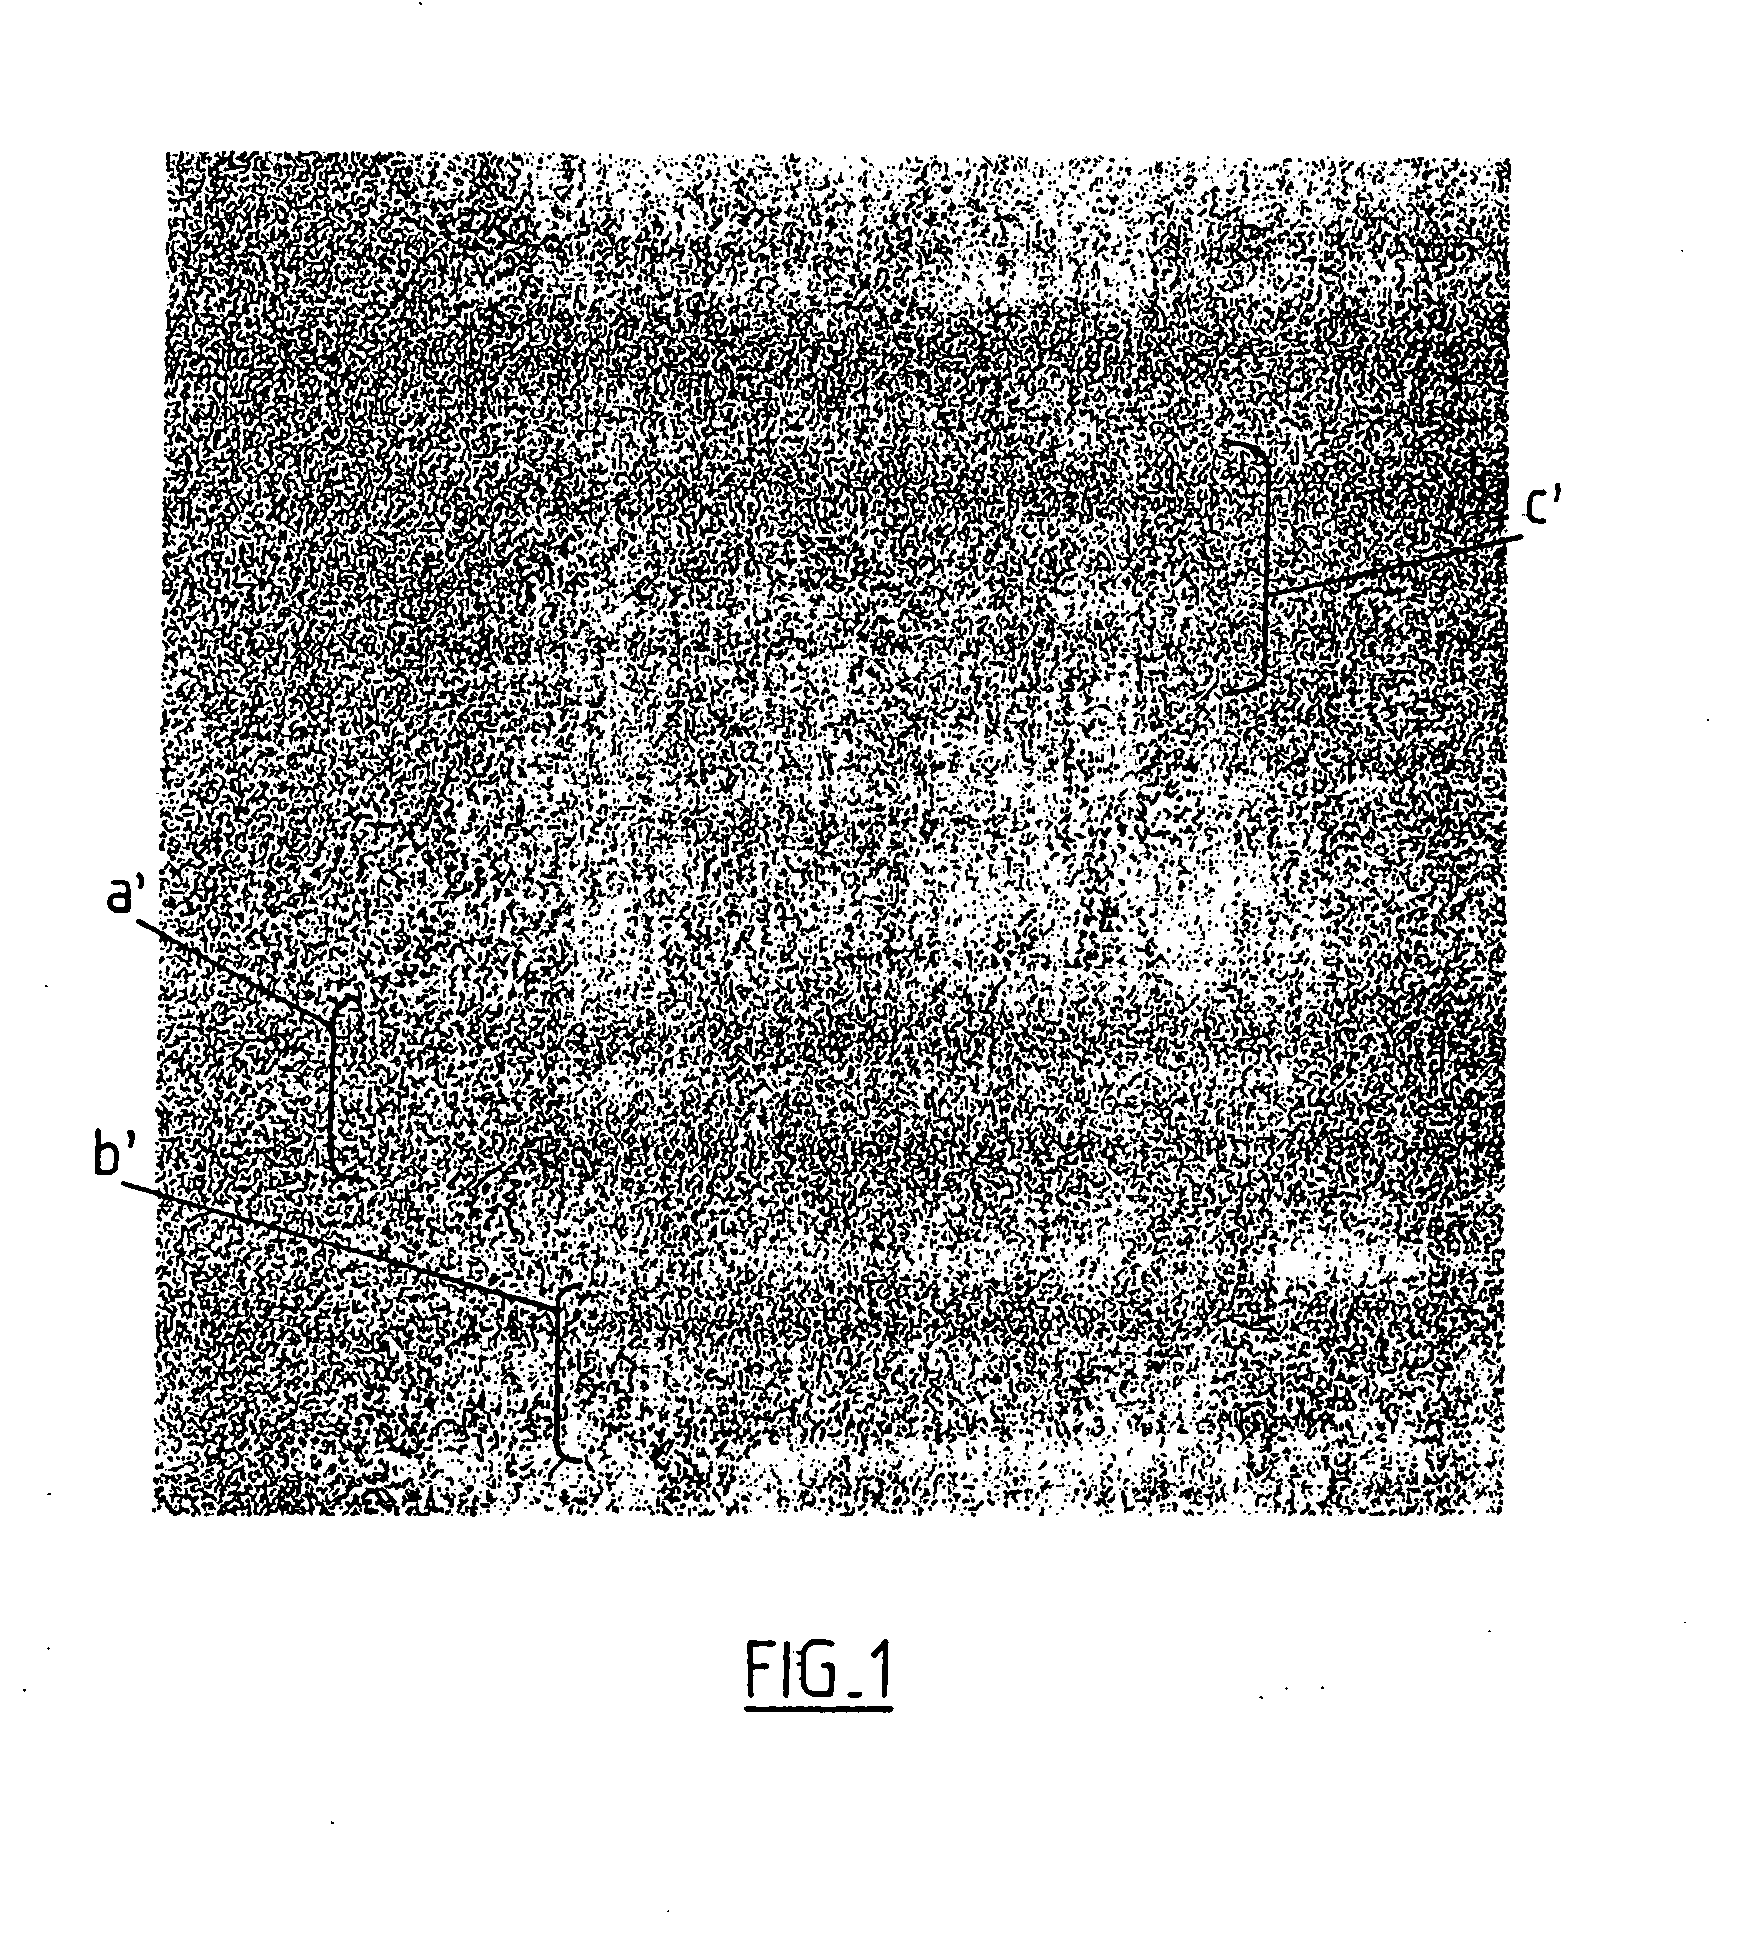 Method for Processing Images Using Automatic Georeferencing of Images Derived from a Pair of Images Captured in the Same Focal Plane